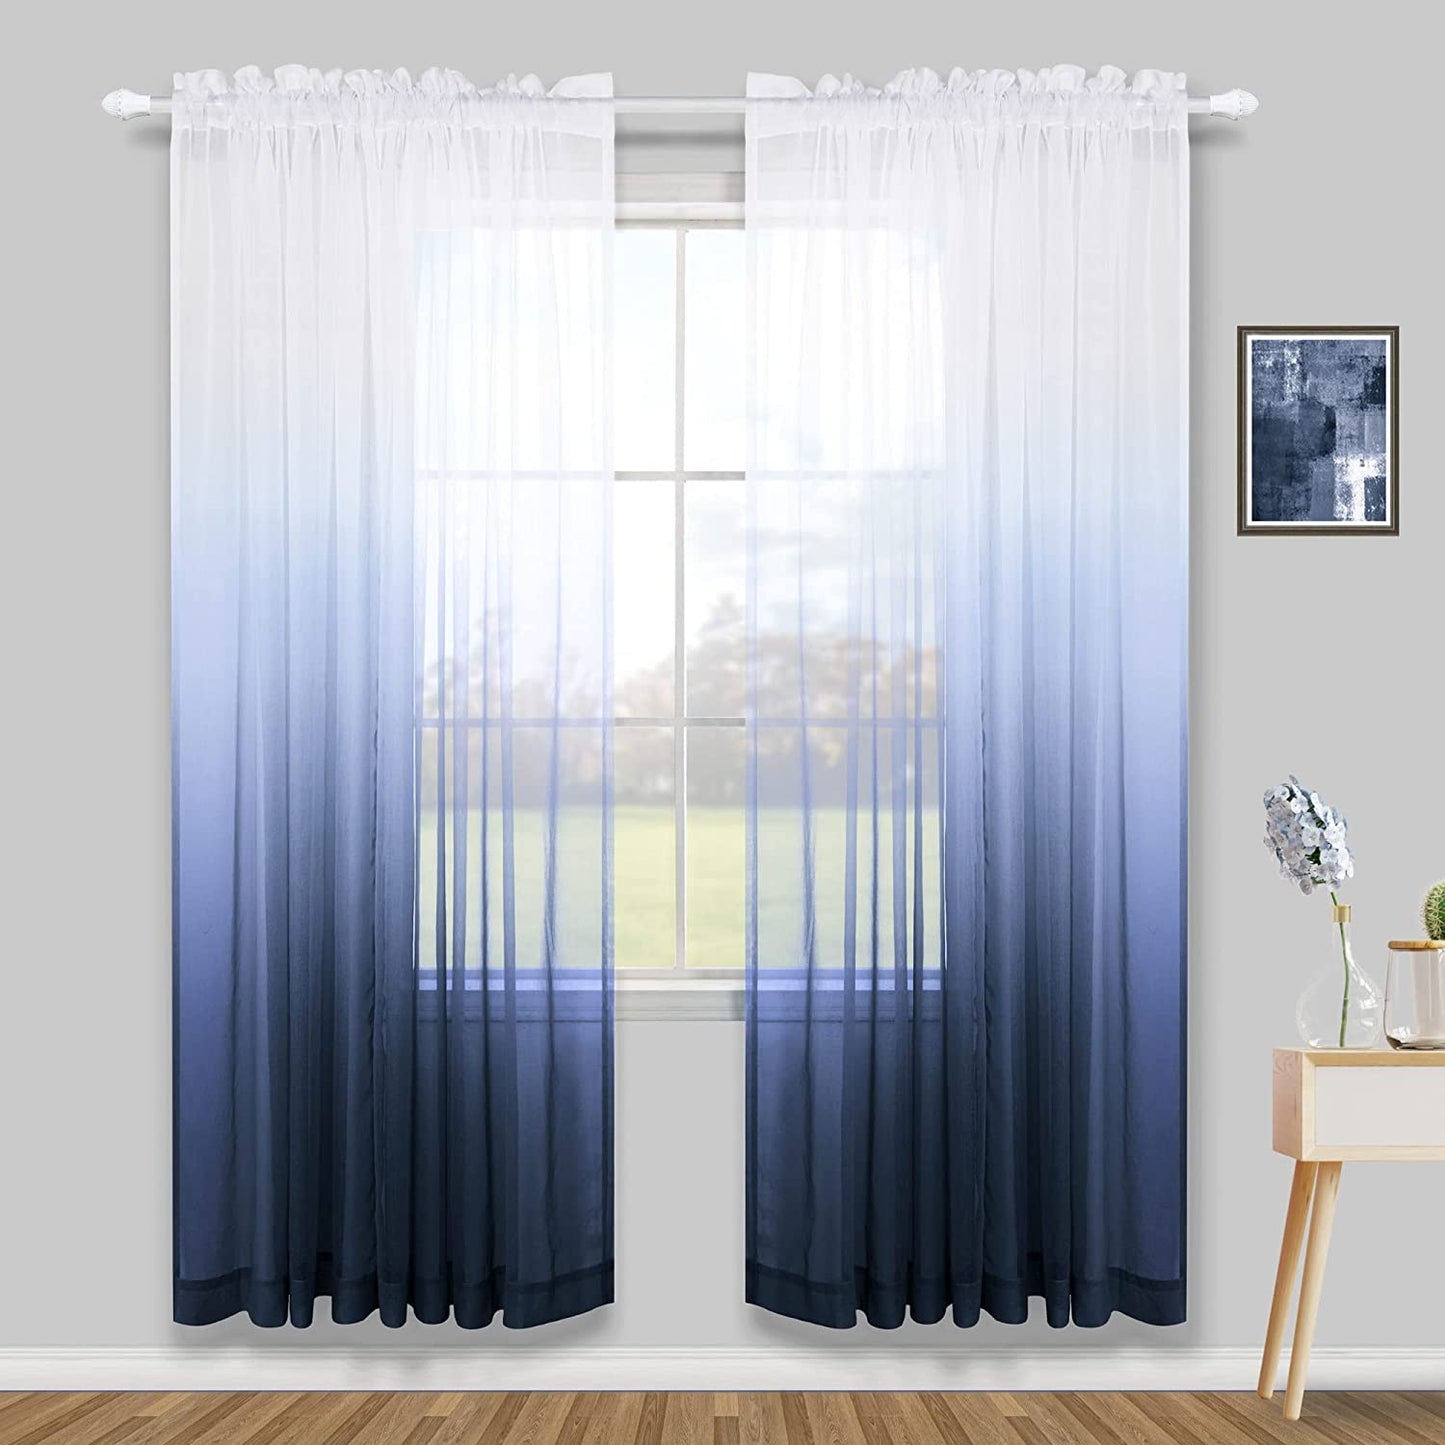 KOUFALL Sage Green Curtains 63 Inch Length for Living Room,2 Panel Set Rod Pocket Boho Curtains for Bedroom 63 Inches Long  KOUFALL TEXTILE Navy Blue 52X84 